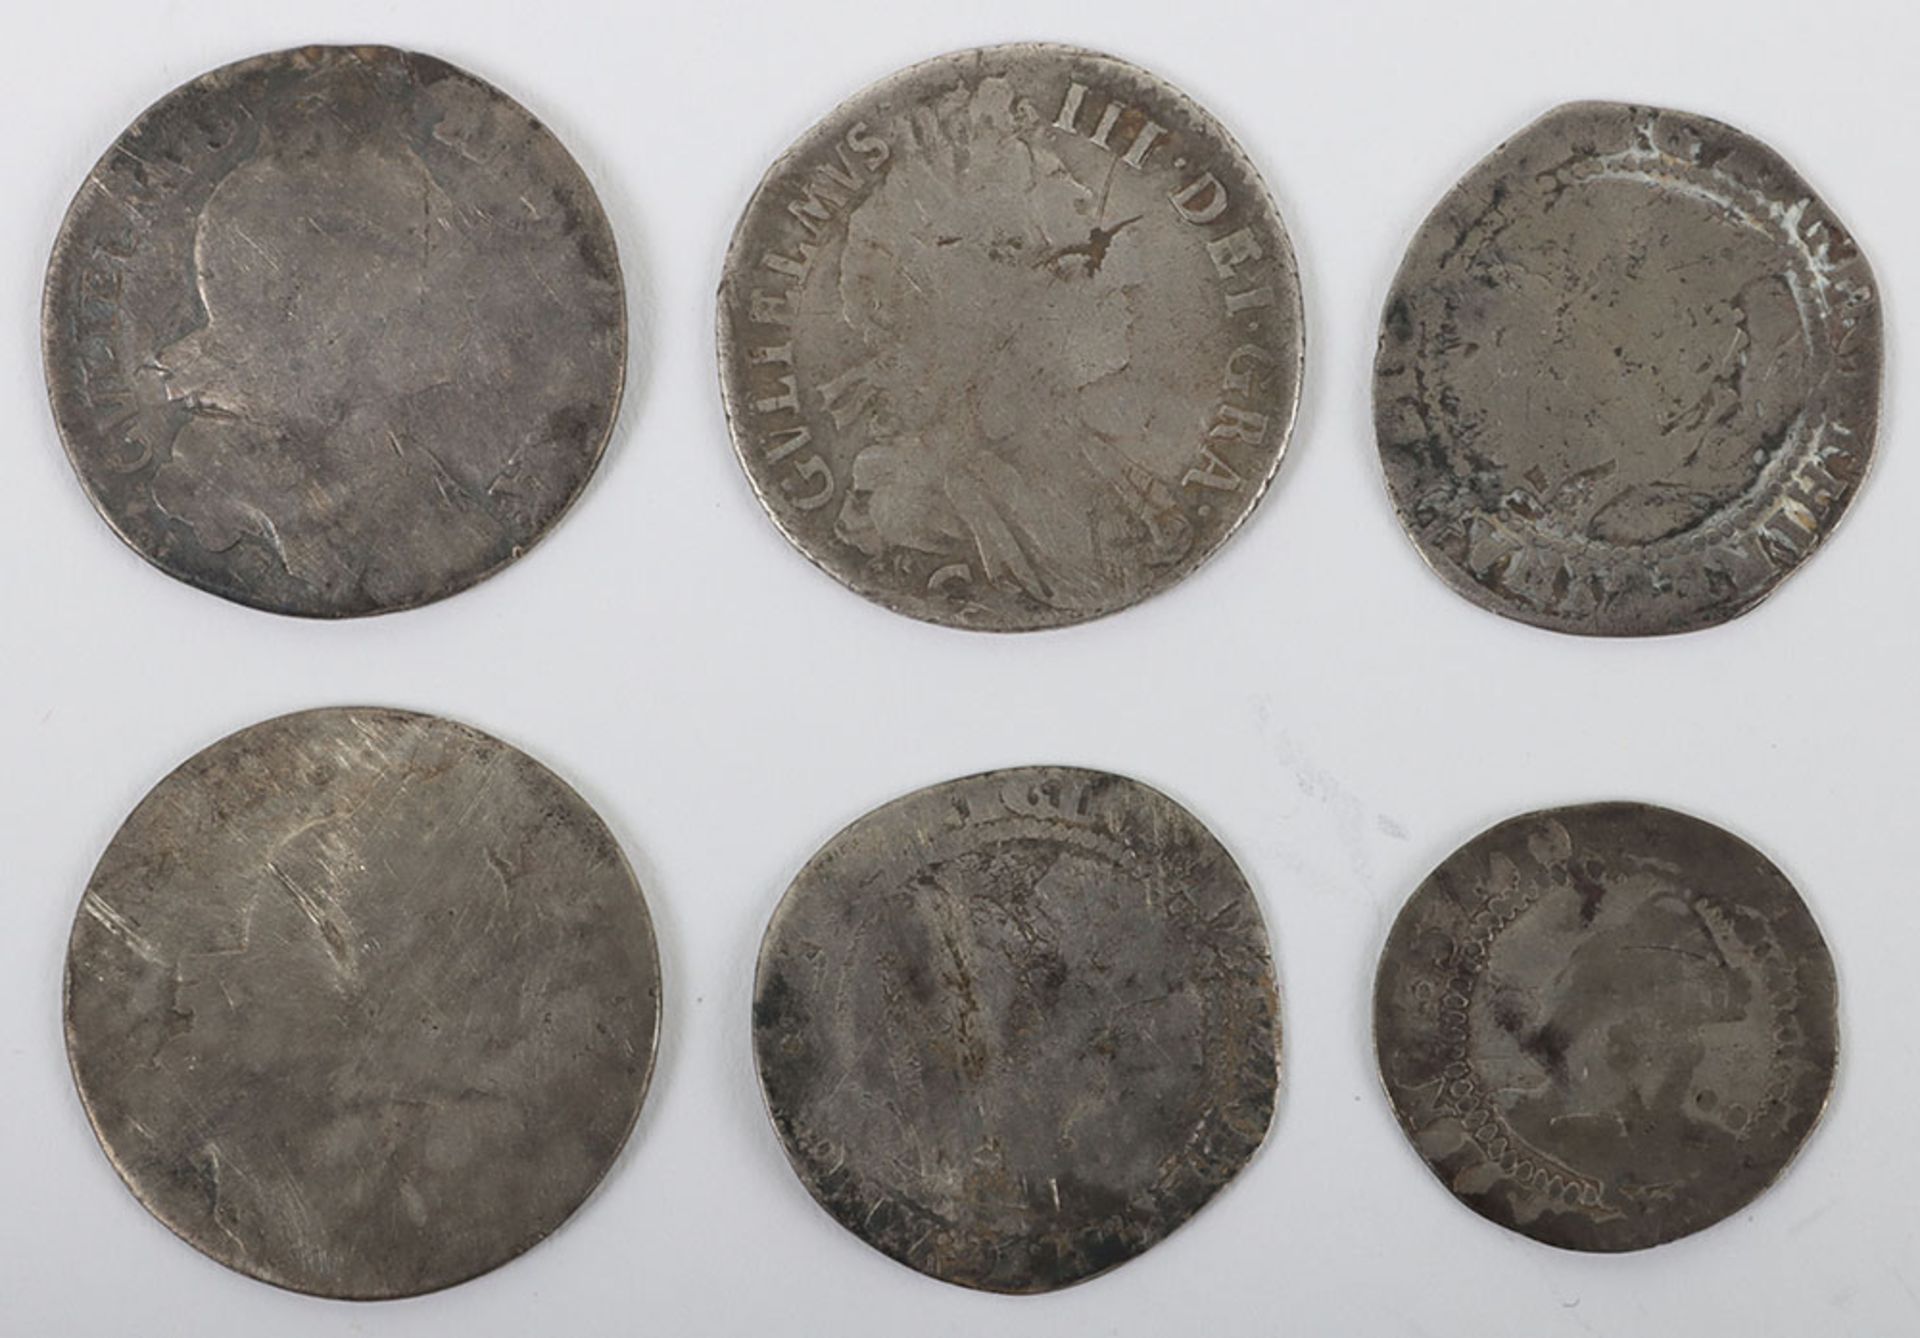 Two Elizabeth I sixpences and a groat with three William III sixpences